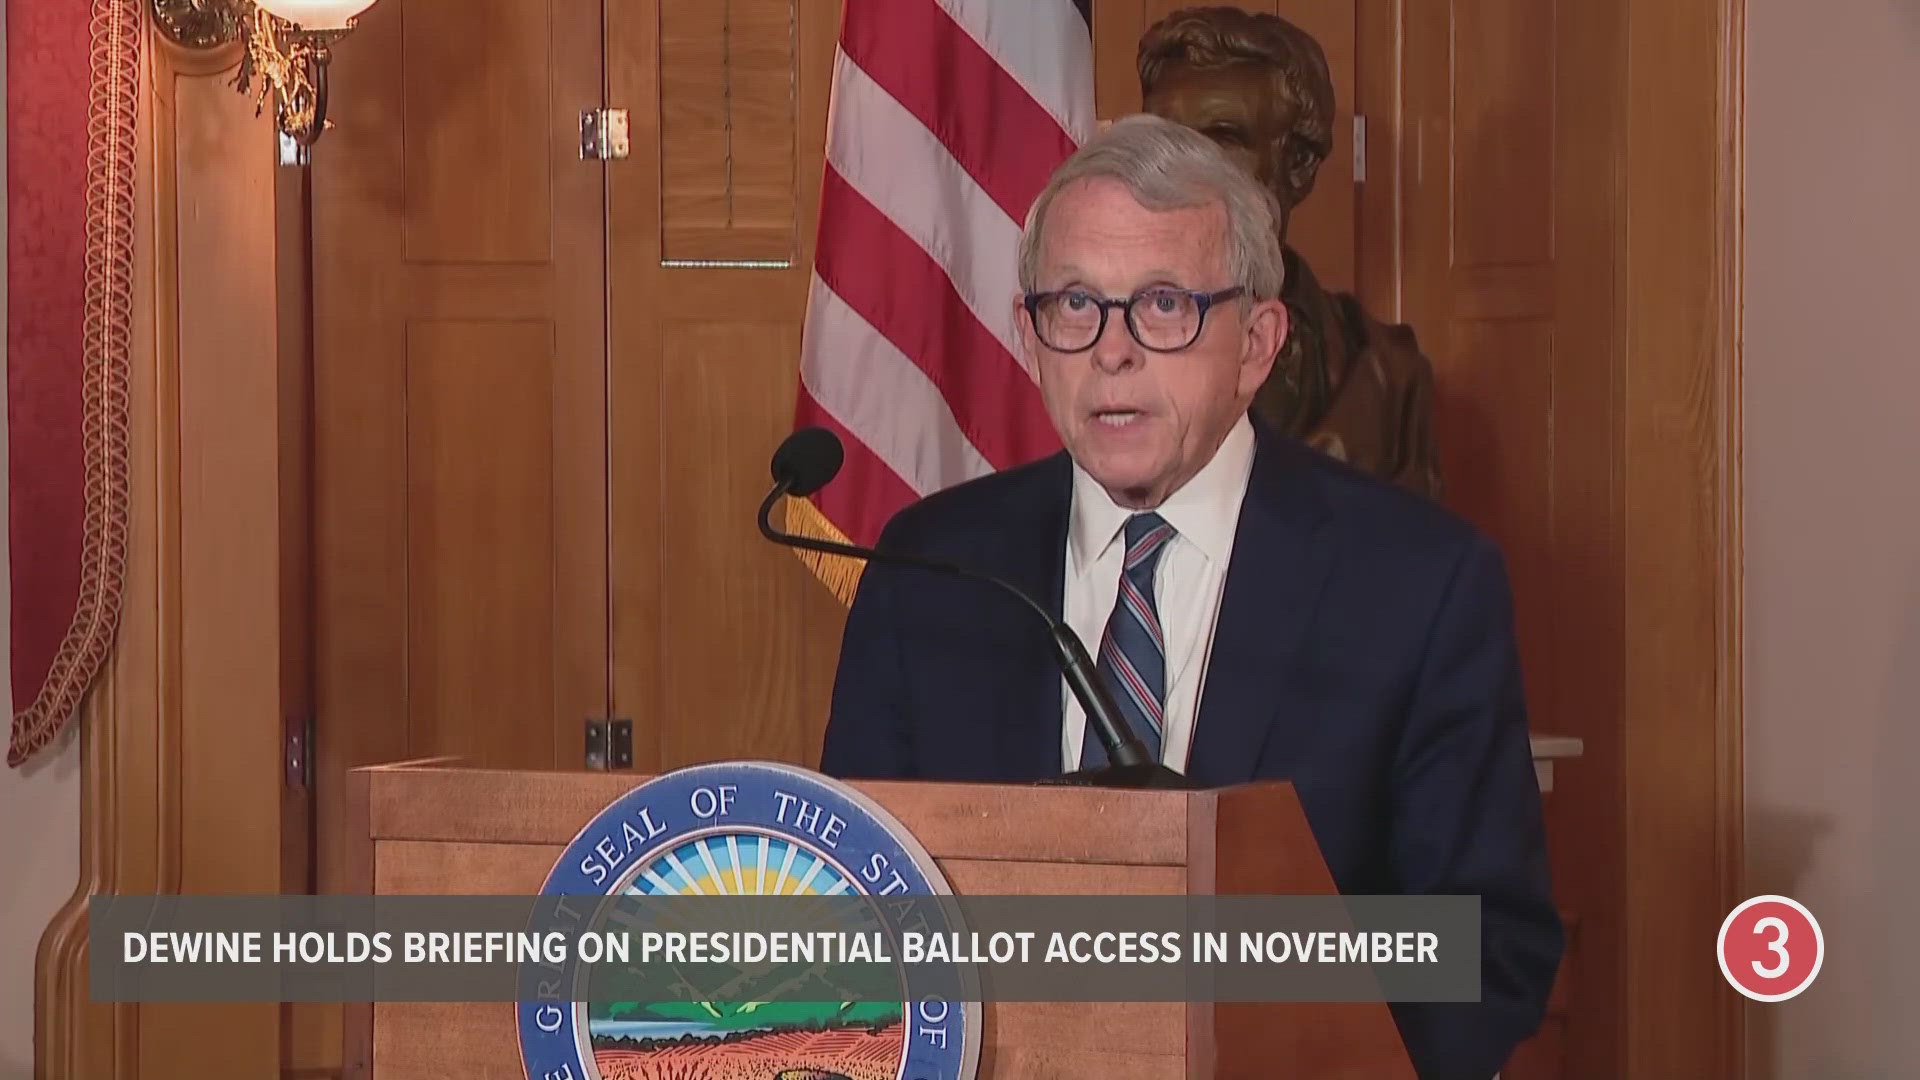 DeWine's press conference comes amid uncertainty as to the status of President Joe Biden on this November's Ohio election ballot.